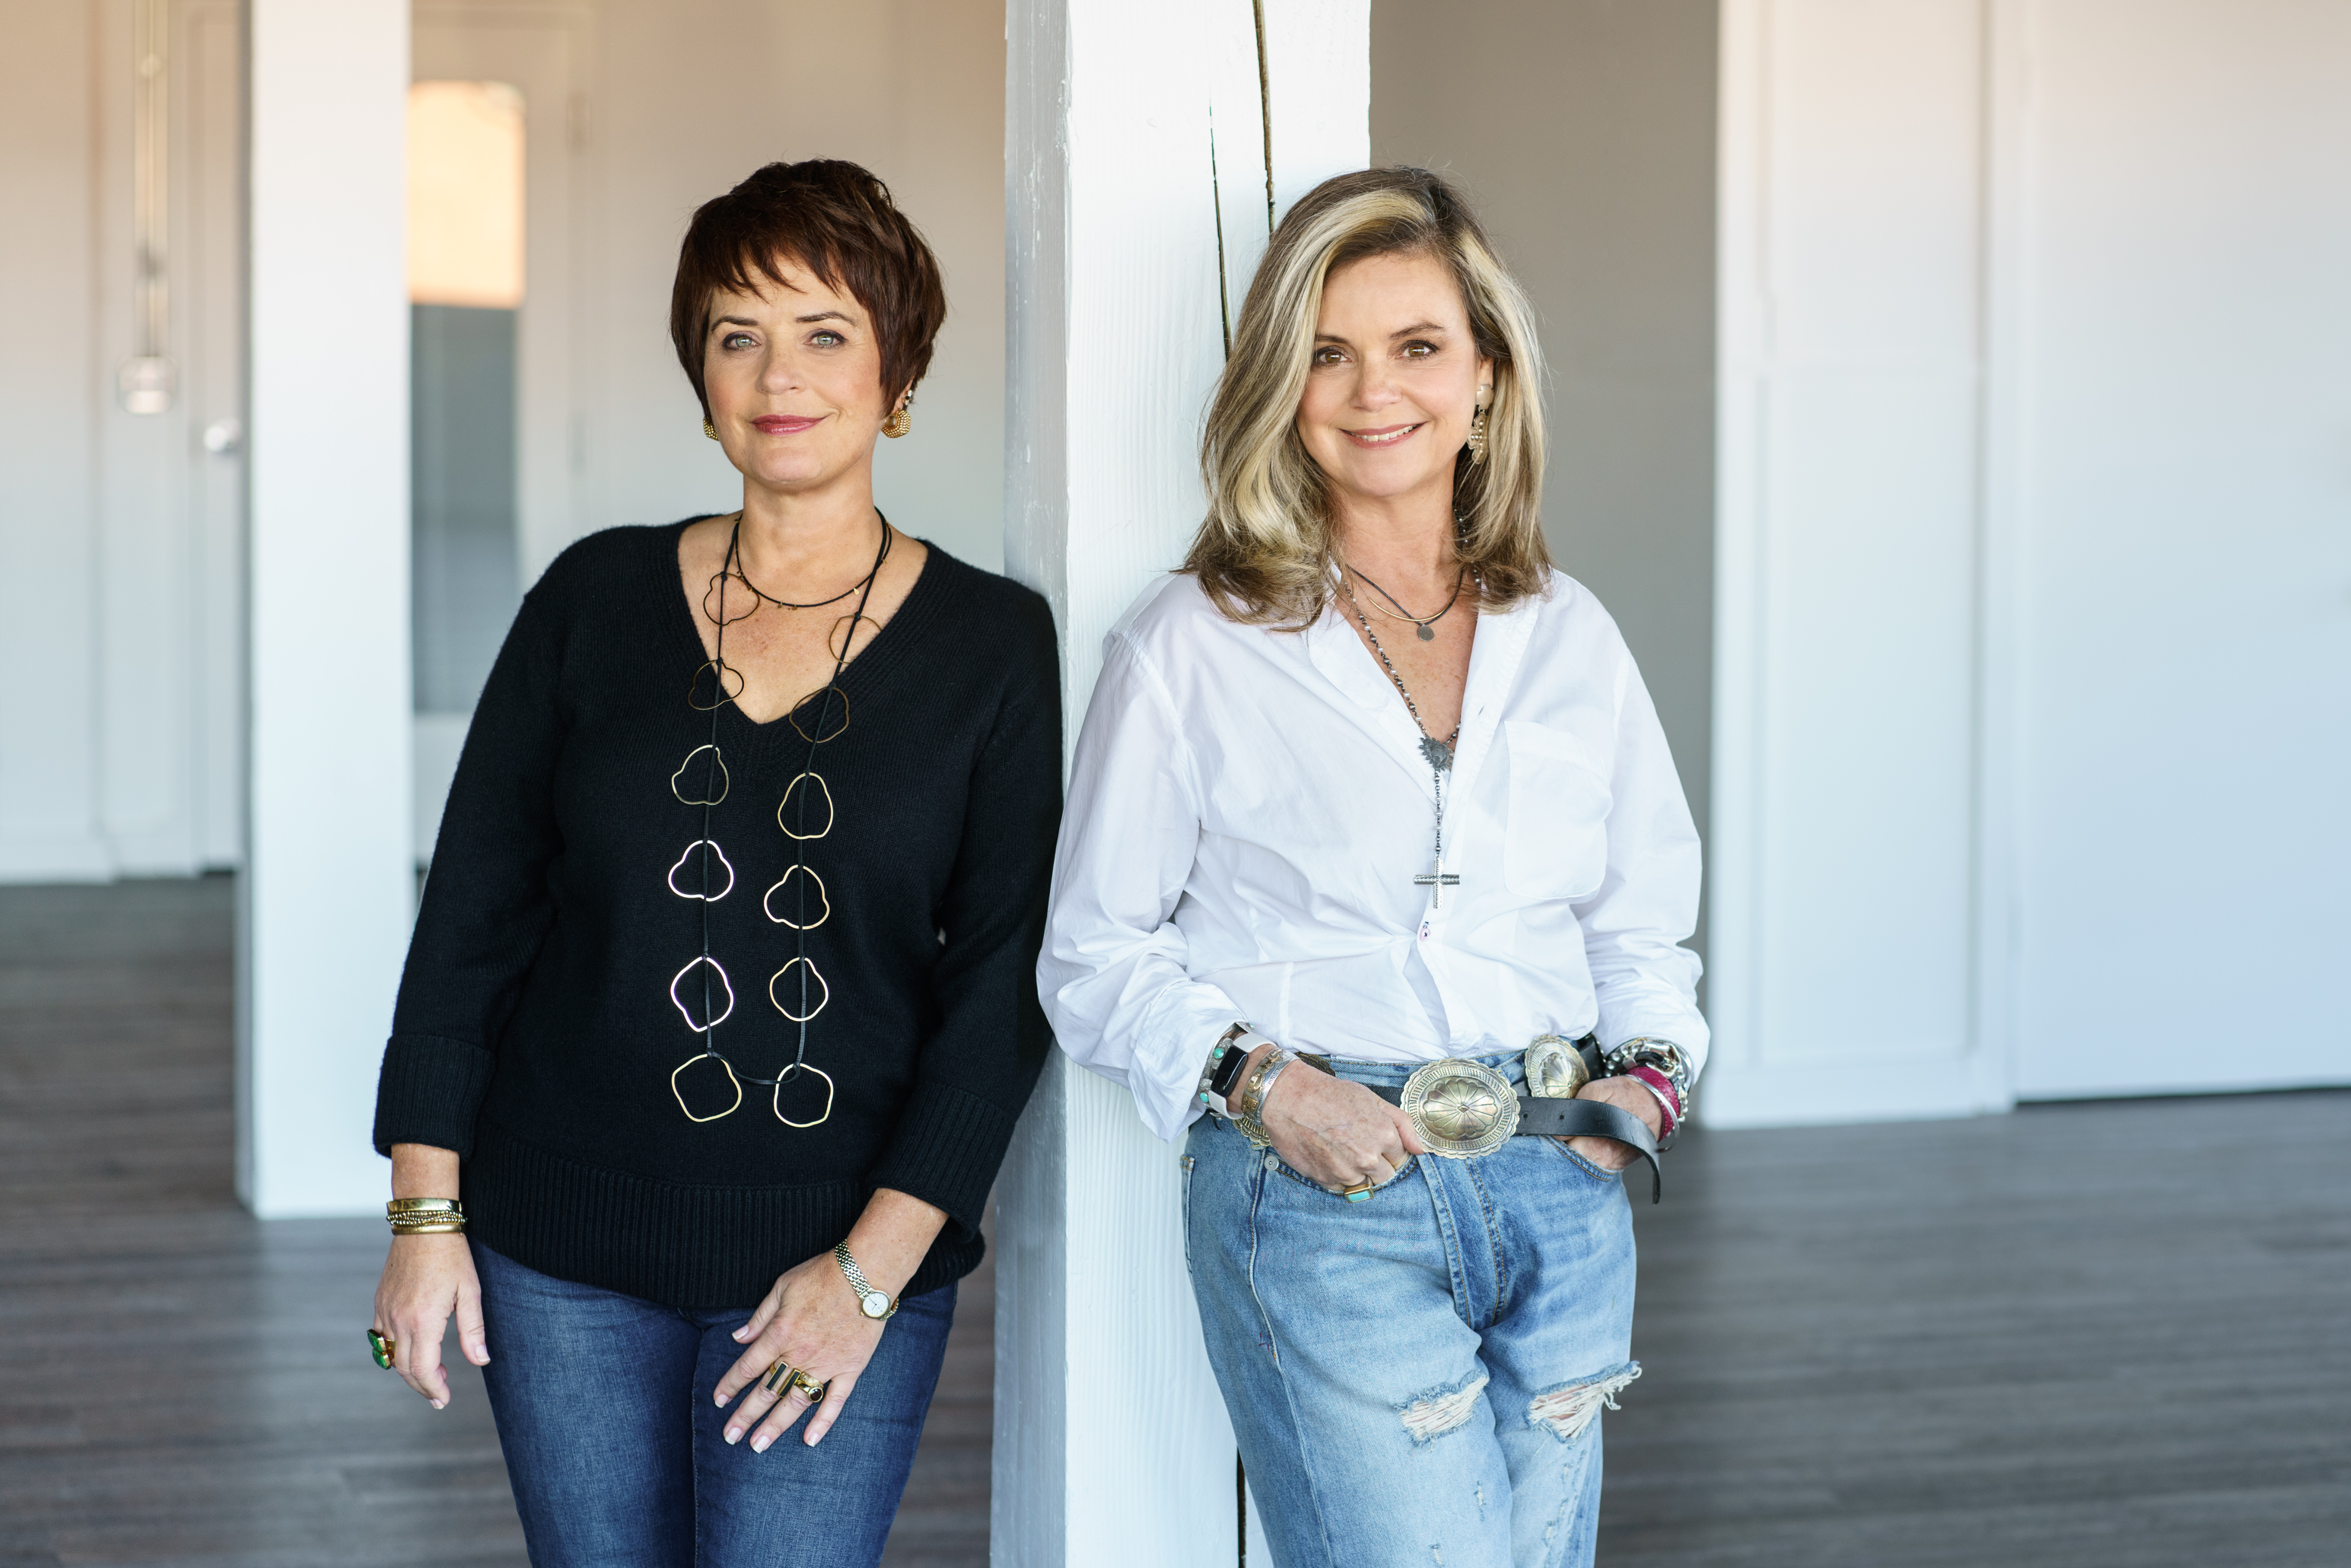  Mansfield O’Neil Interior Design founders Tiffany and Lisa